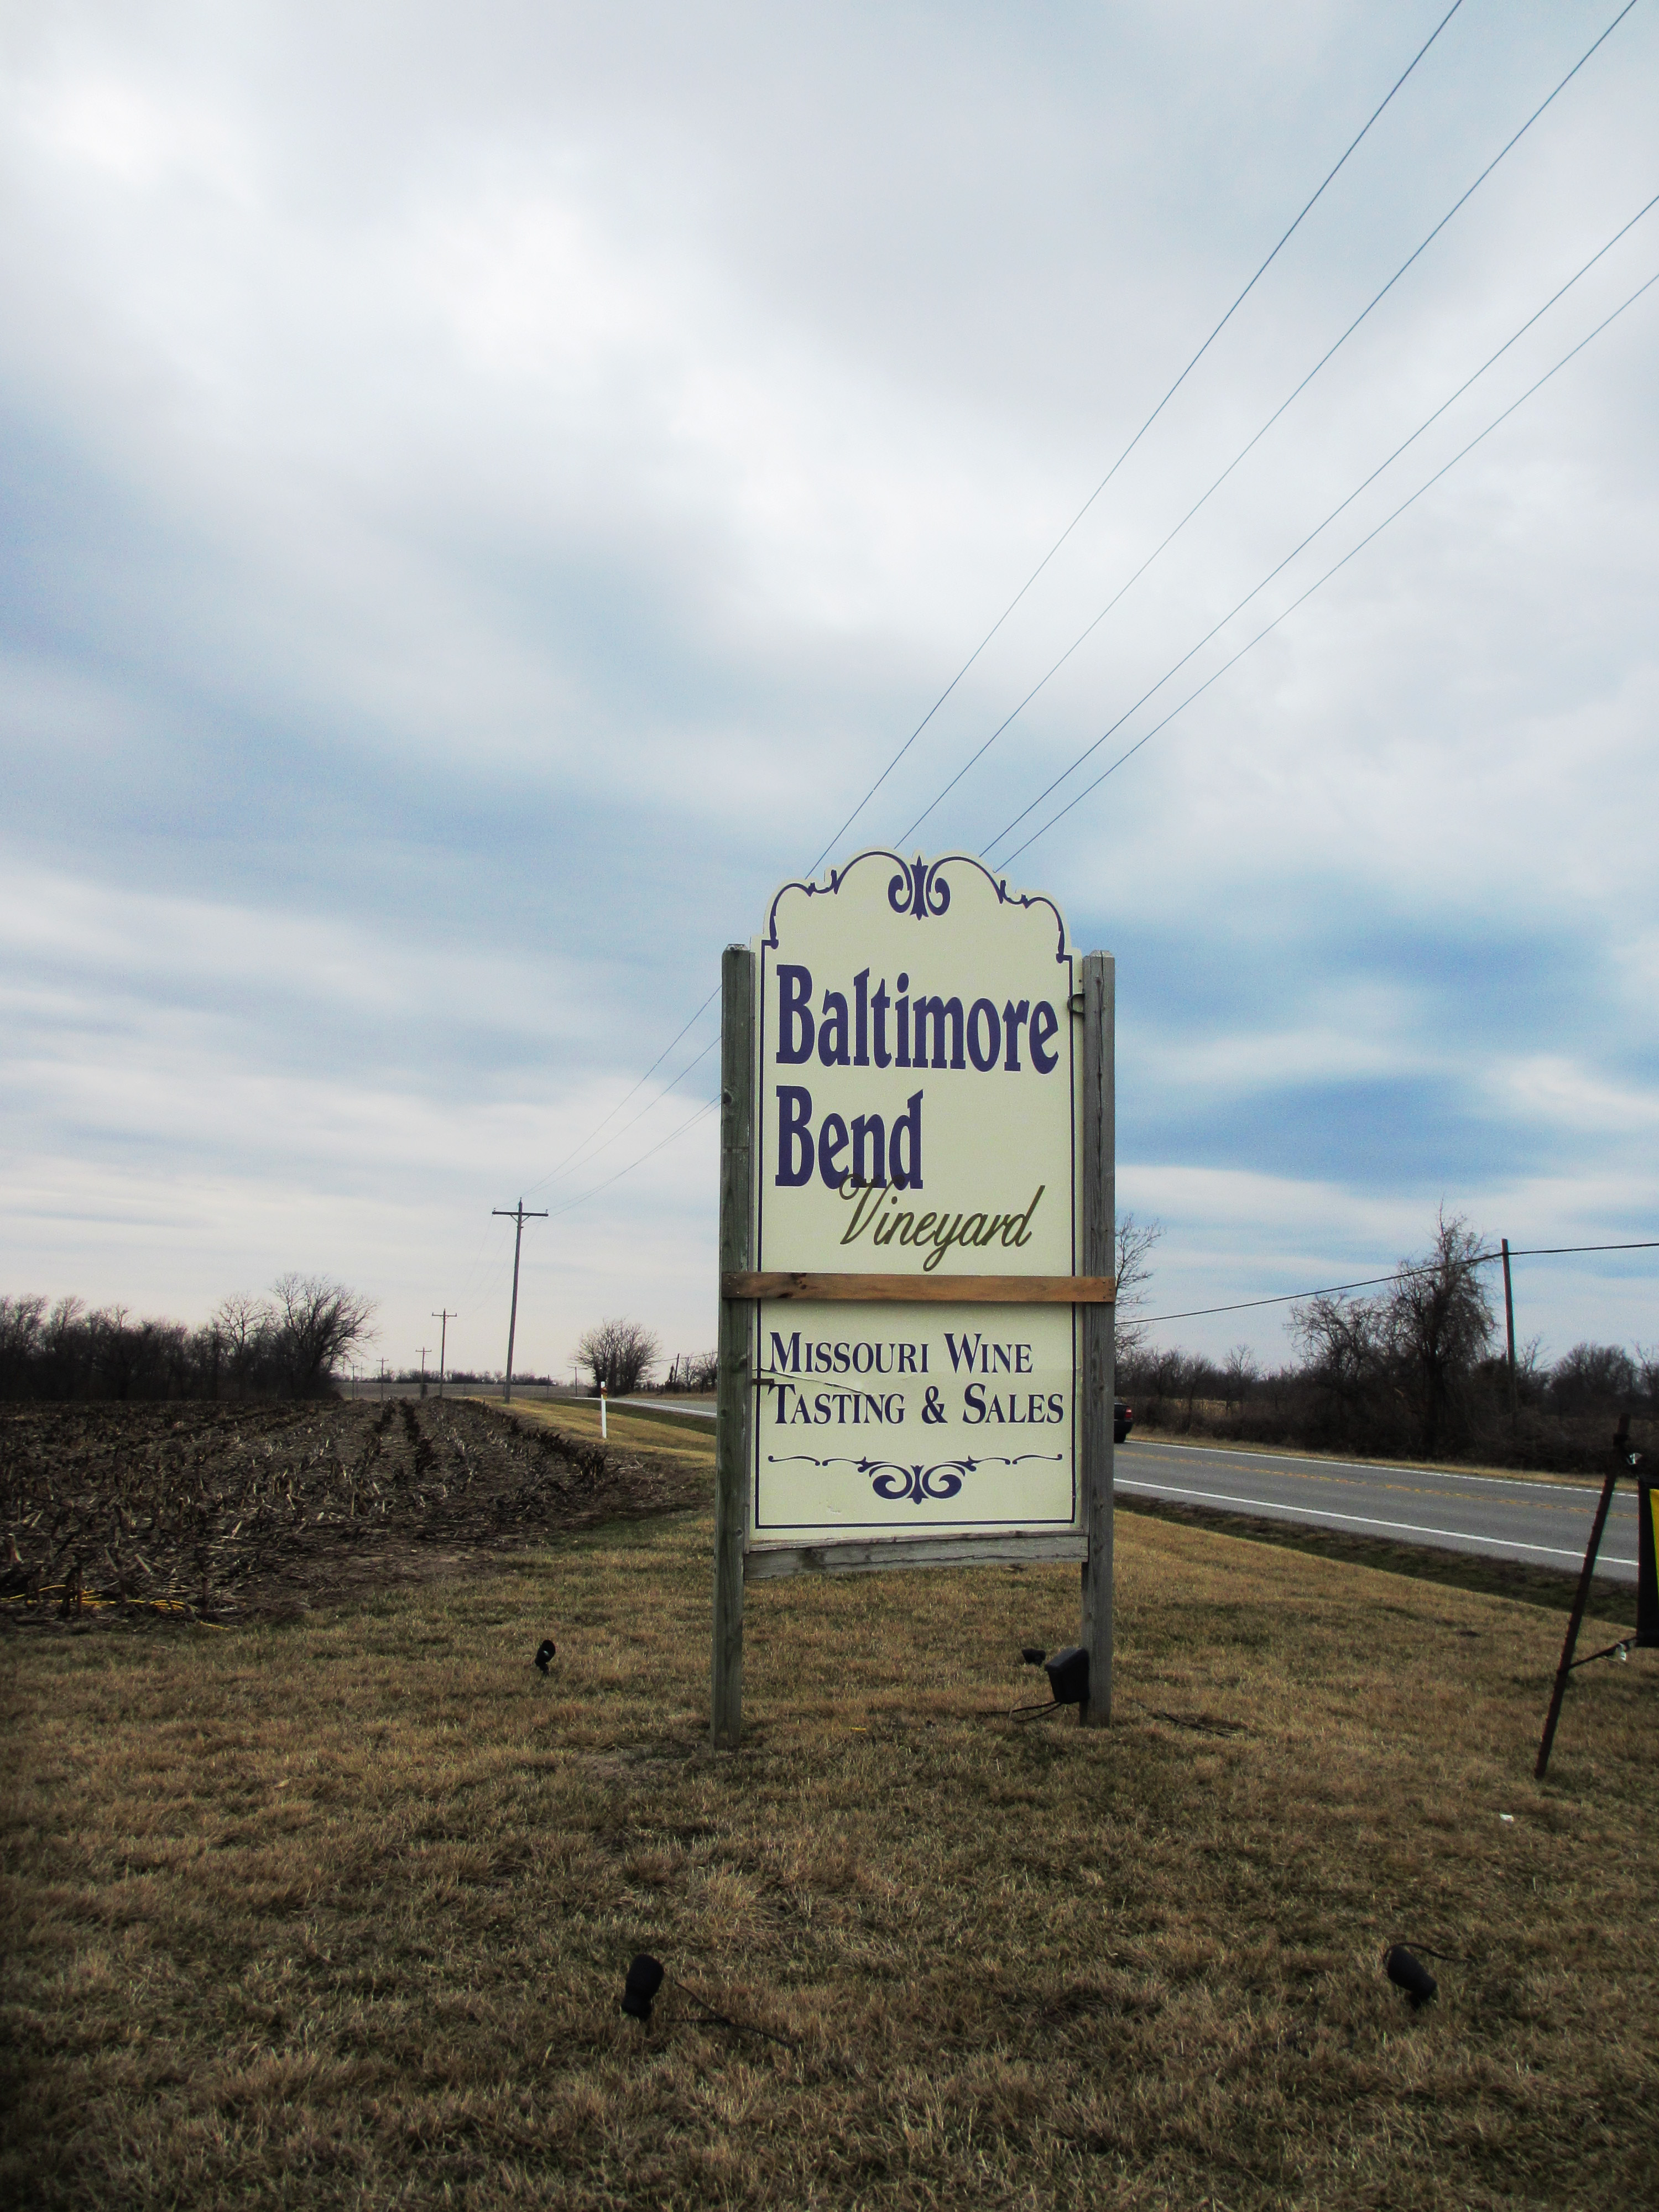 Baltimore Bend Vineyard - outdoor photo, daytime, of the winery entrance sign which reads "Baltimore Bend Winery"